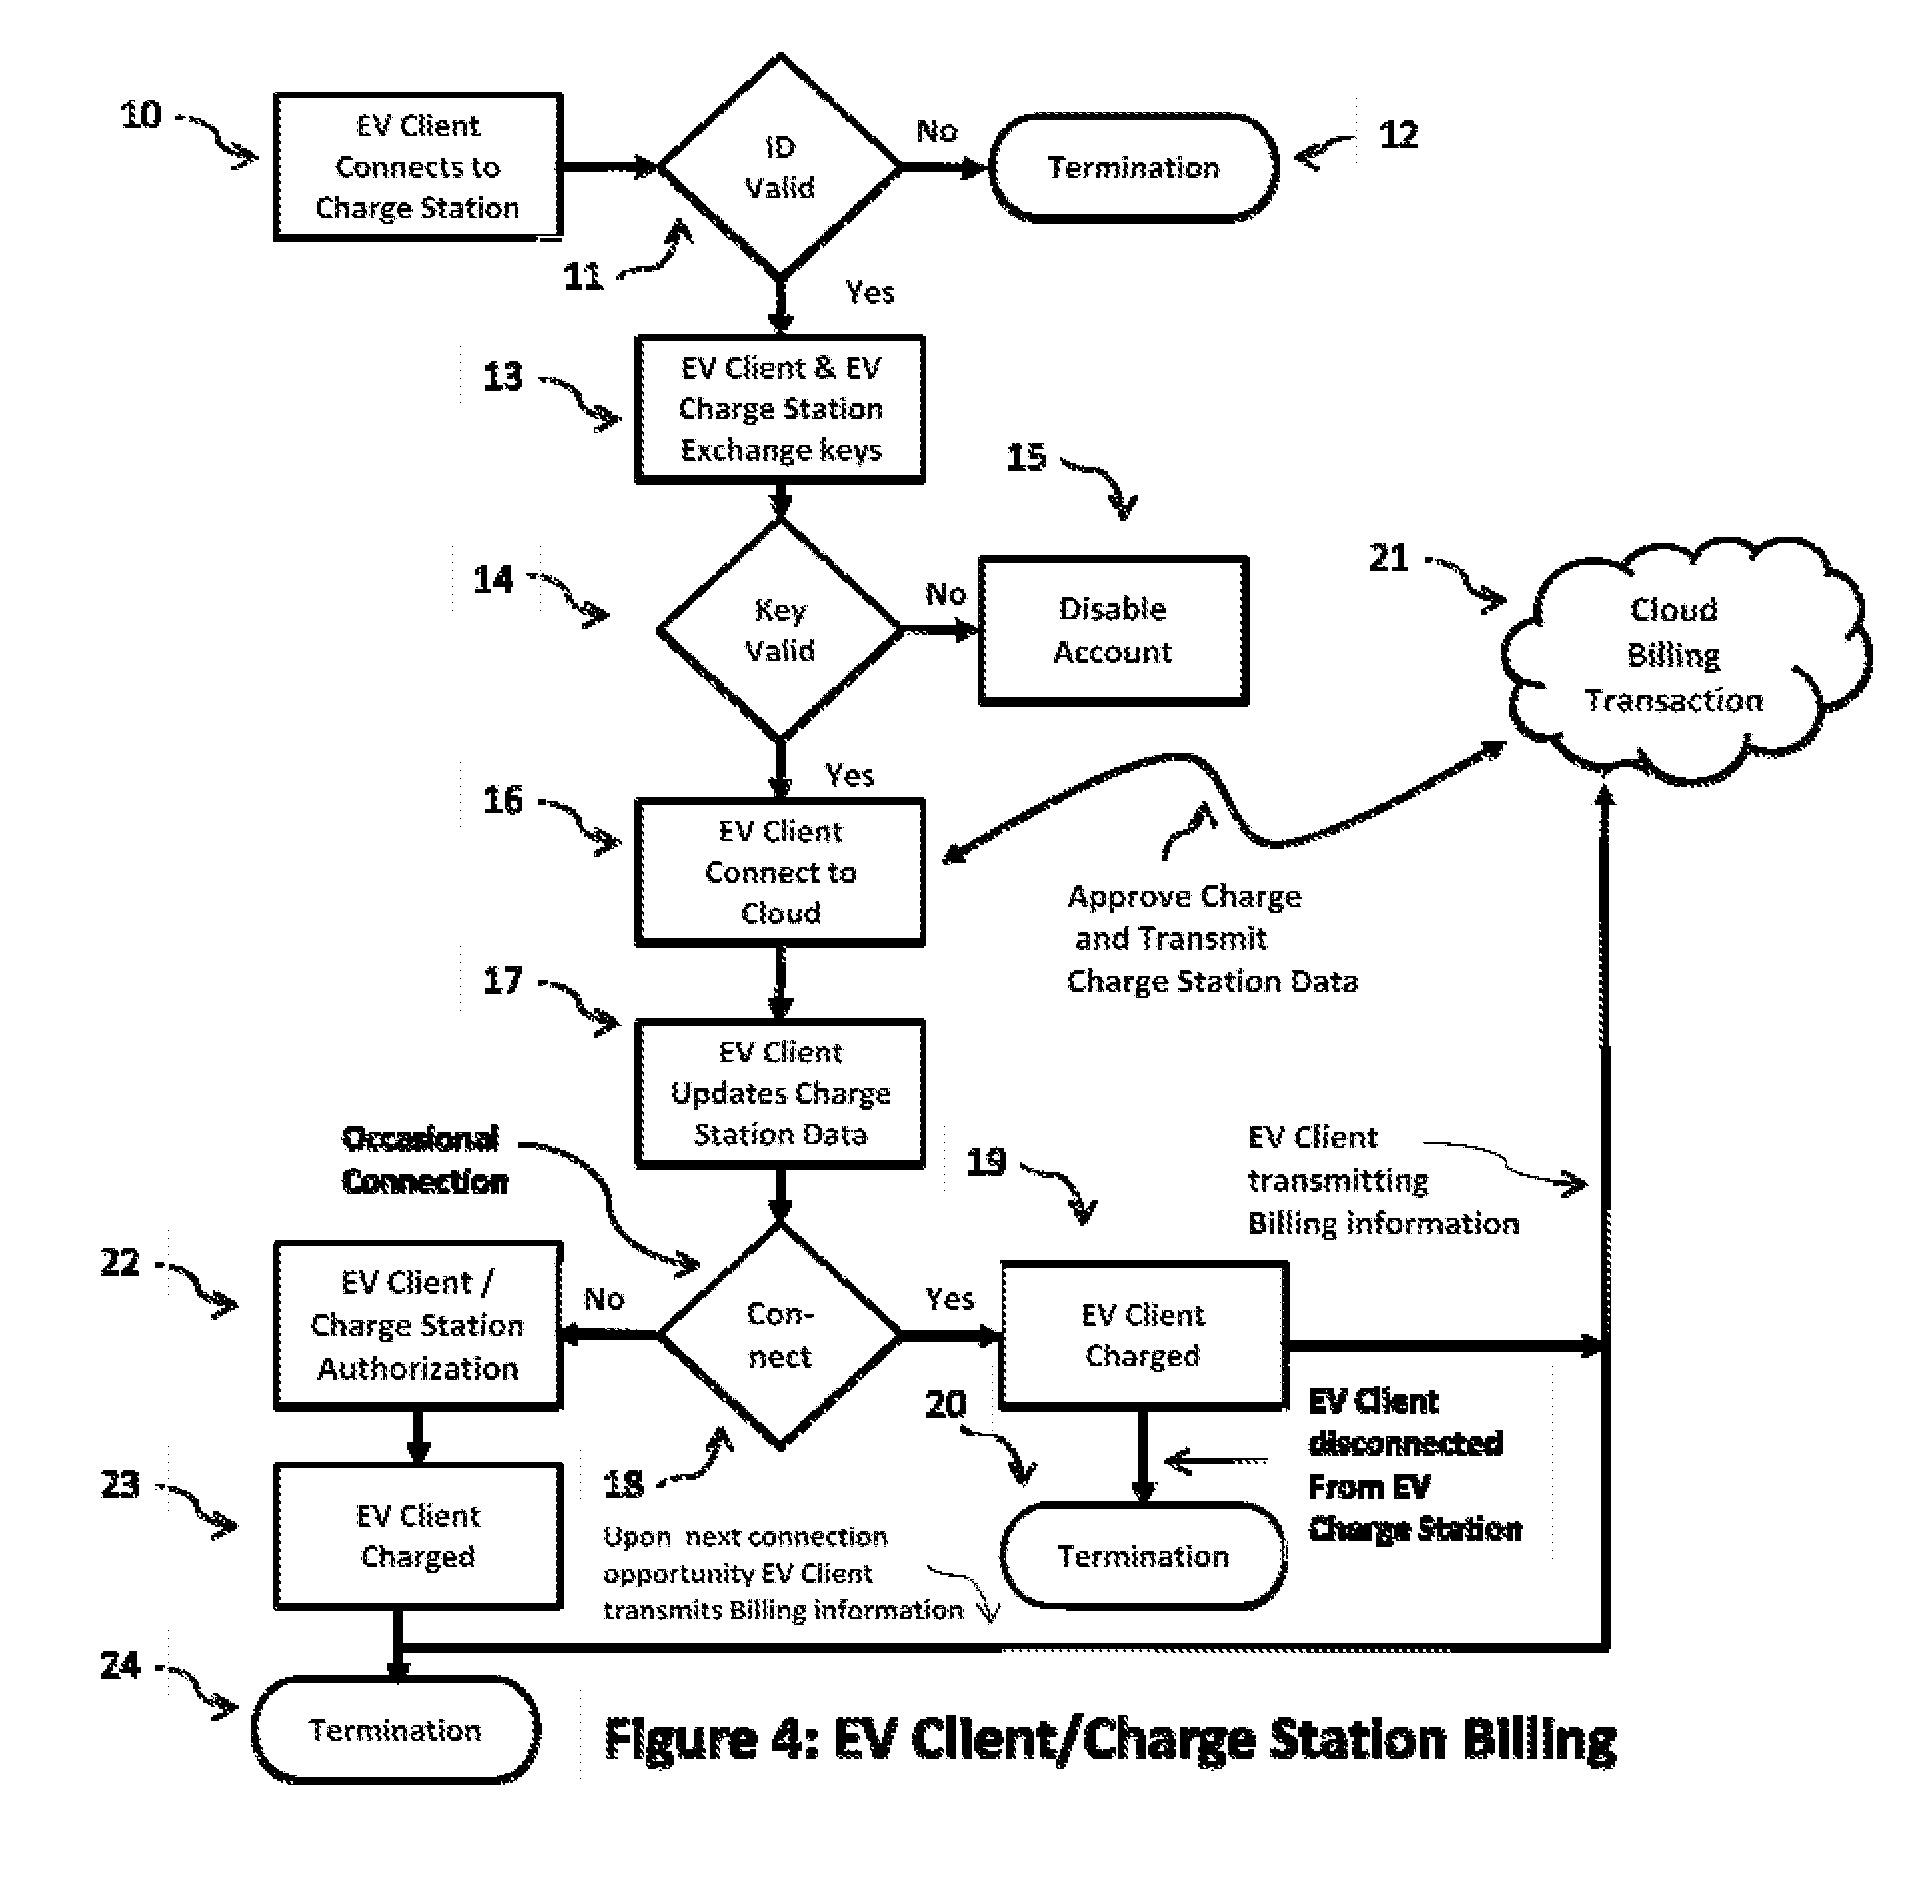 Method and Process of billing for goods leveraging a single connection action